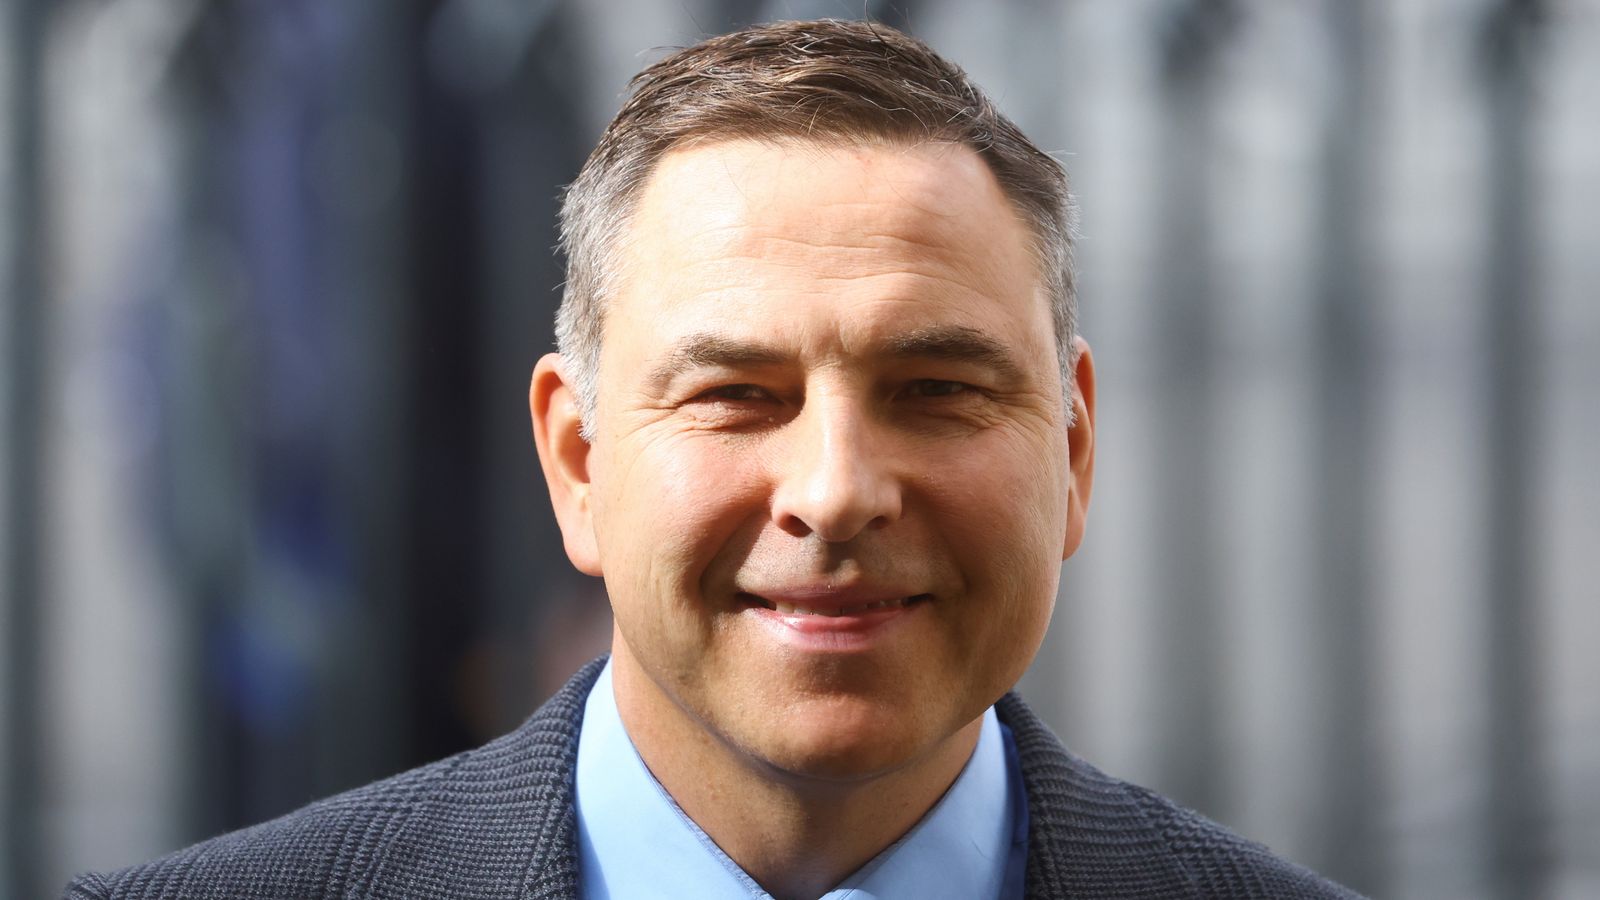 David Walliams' future on Britain's Got Talent 'up in the air' after apology for offensive remarks